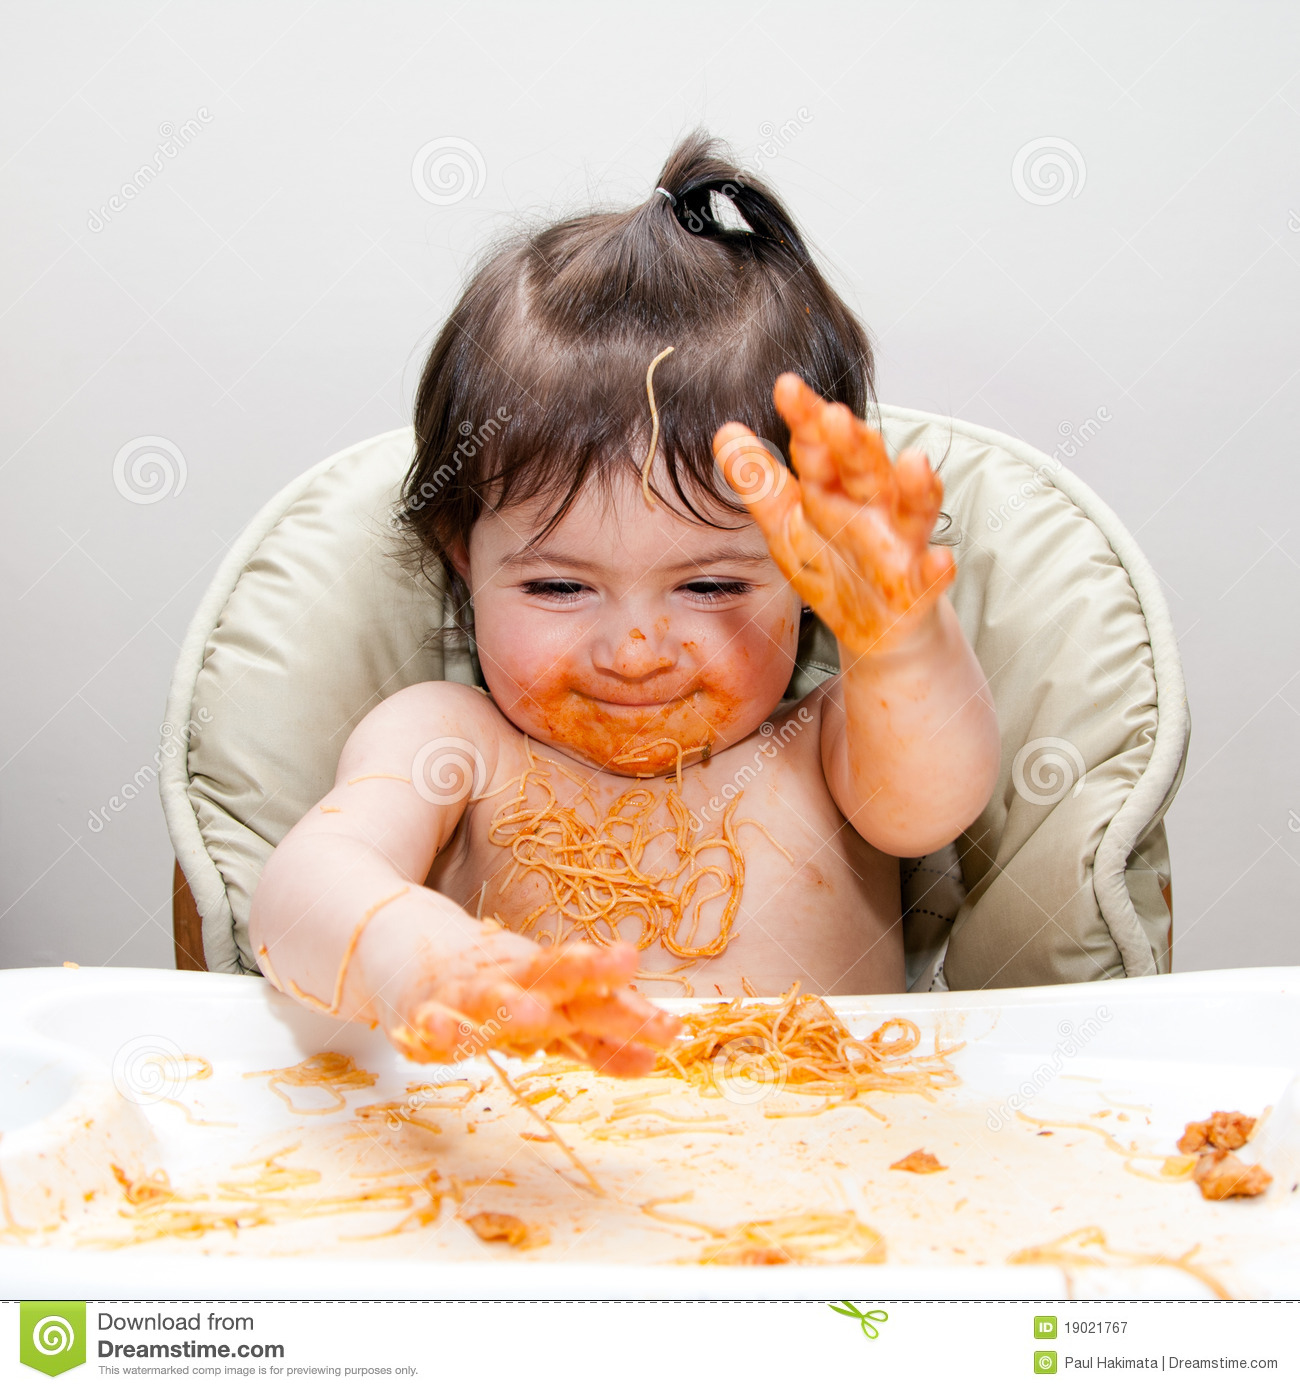 Happy Baby Having Fun Eating Messy Slapping Hands Covered In Spaghetti